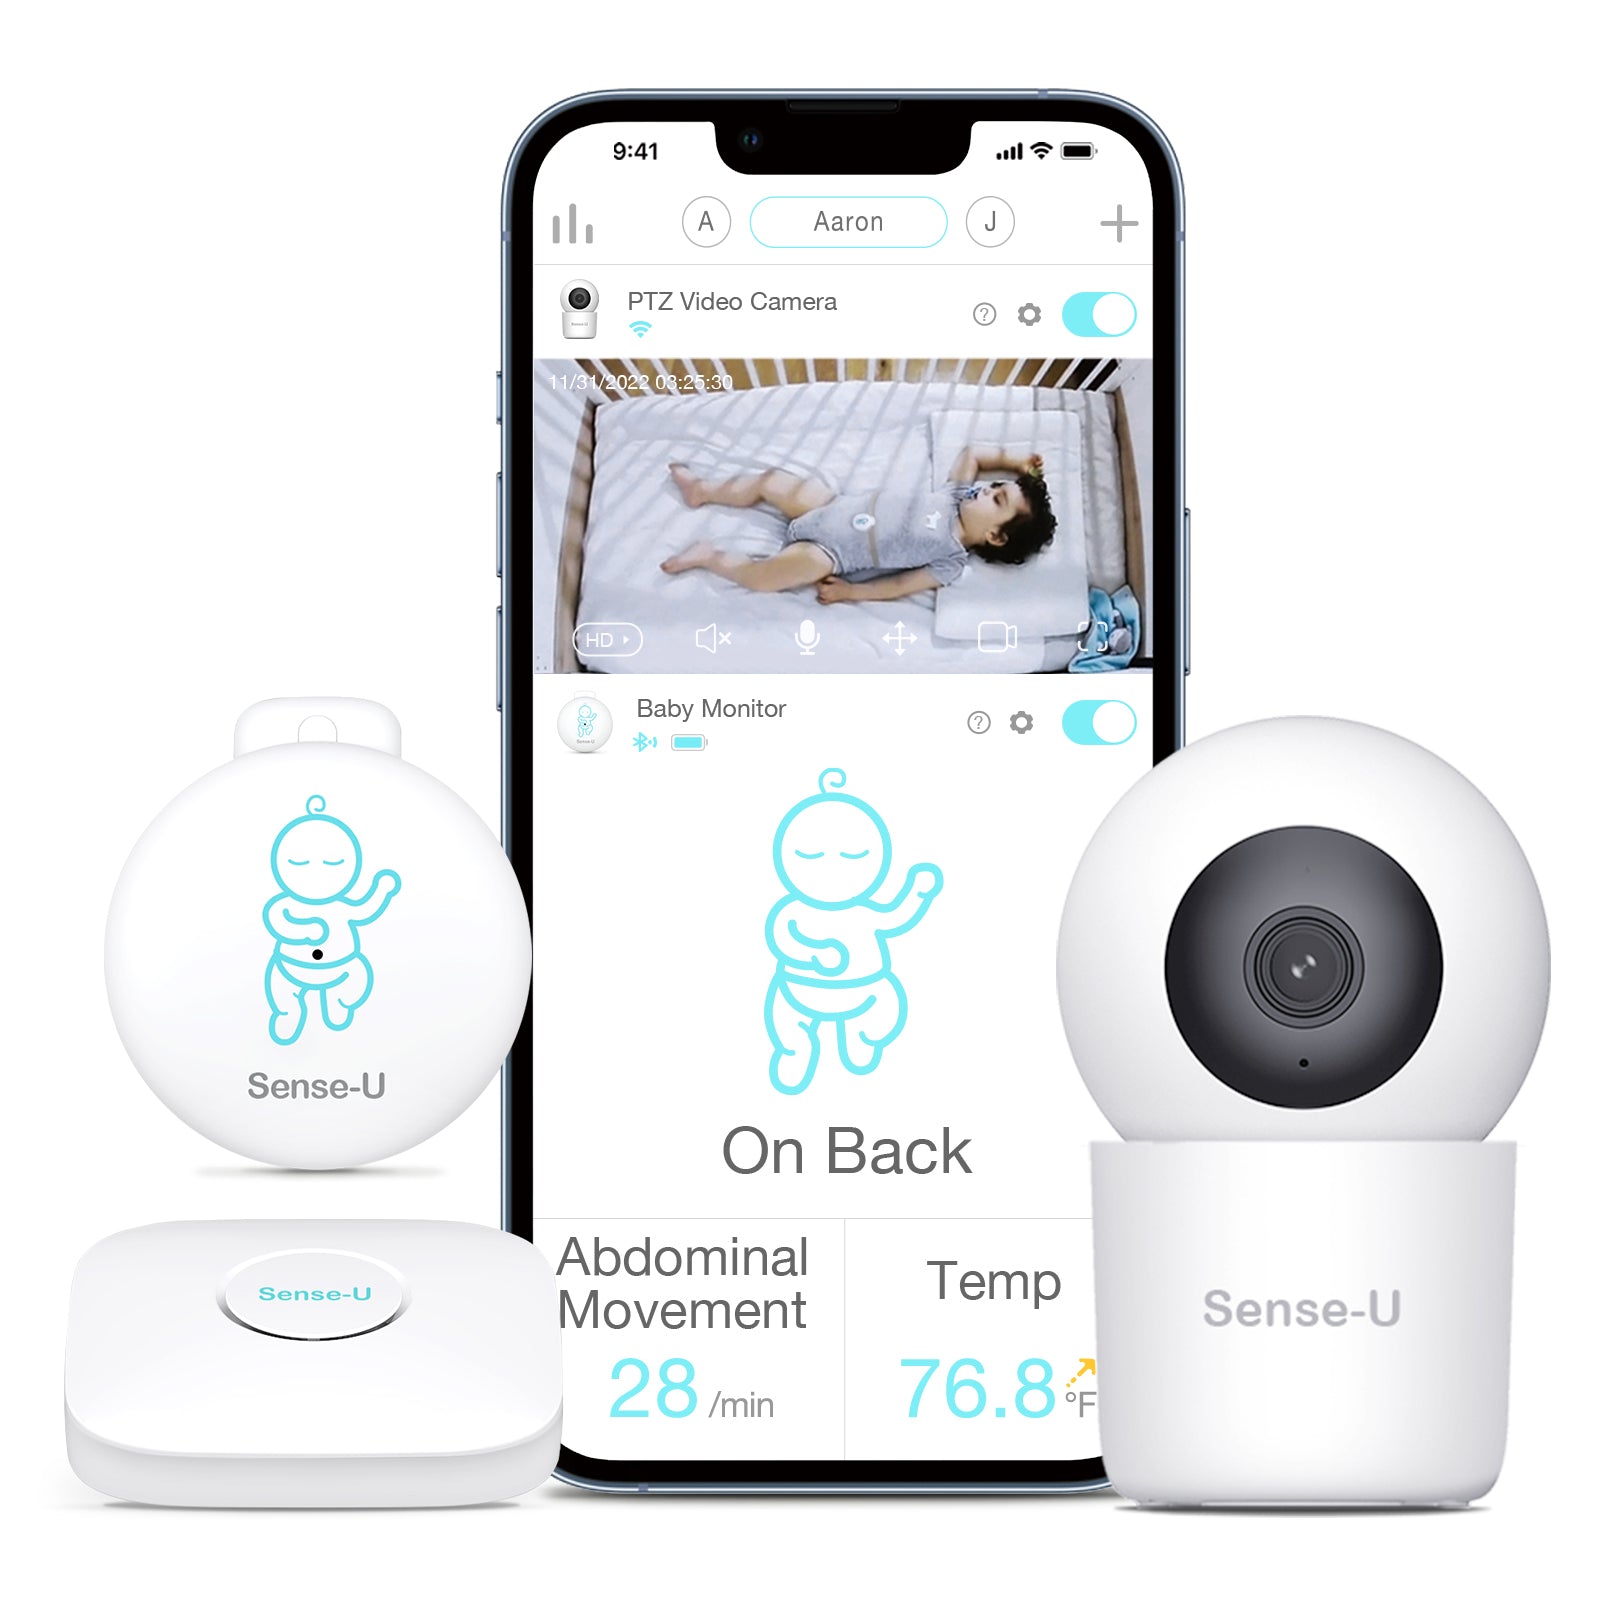 Sense-U Bundle: Know your child is okay while streaming HD video